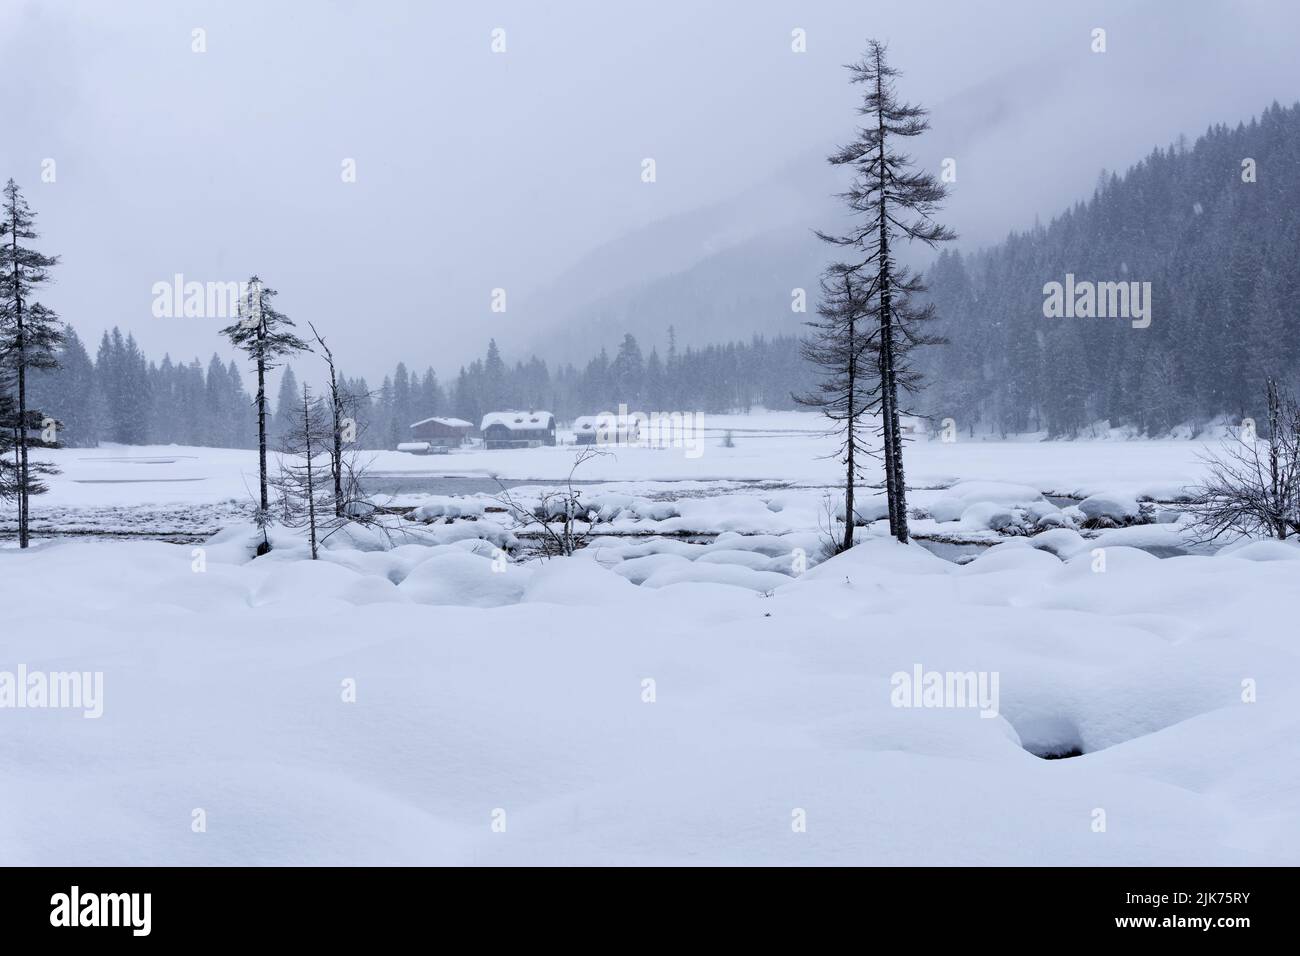 Winter landscape with frozen lake and snowfall.  Sorrounded mountains covered in the fog. Jagersee, Salzburger Alps, Austria, Europe. Stock Photo